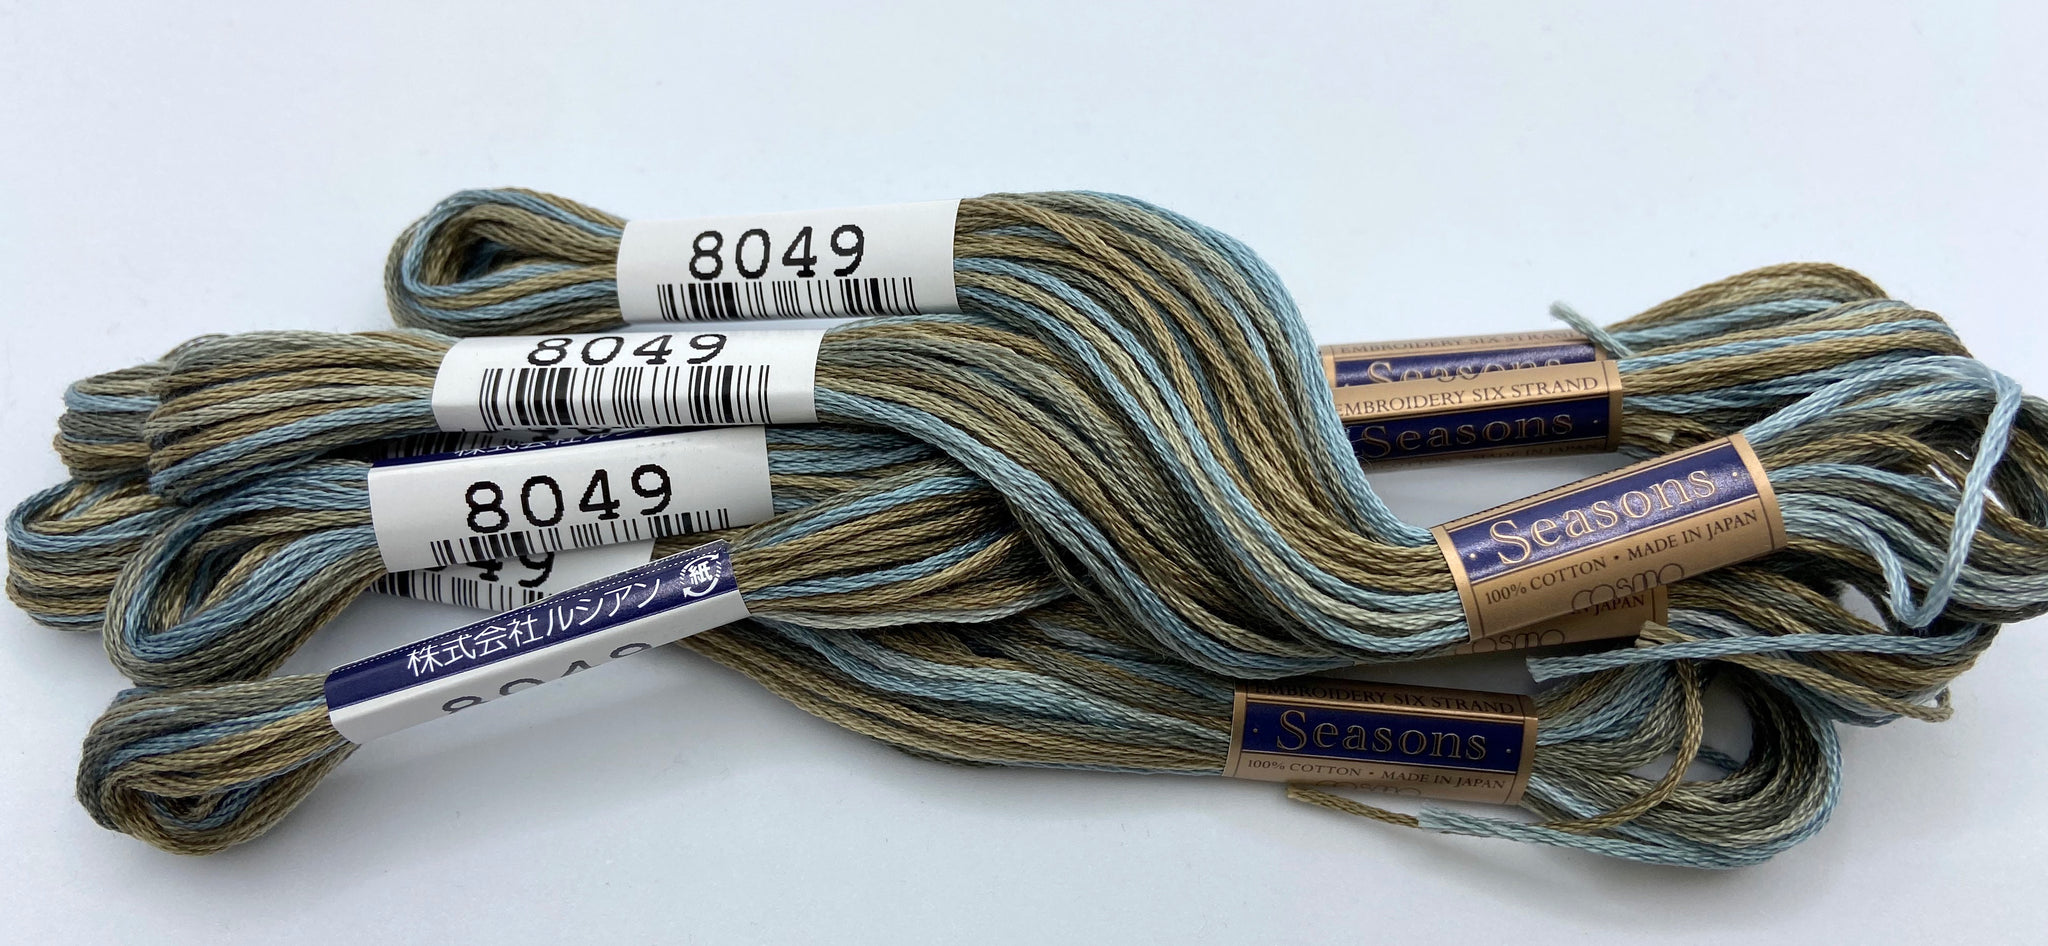 COSMO Seasons Embroidery Floss Set Lecien Cosmo 6 Strand Cotton